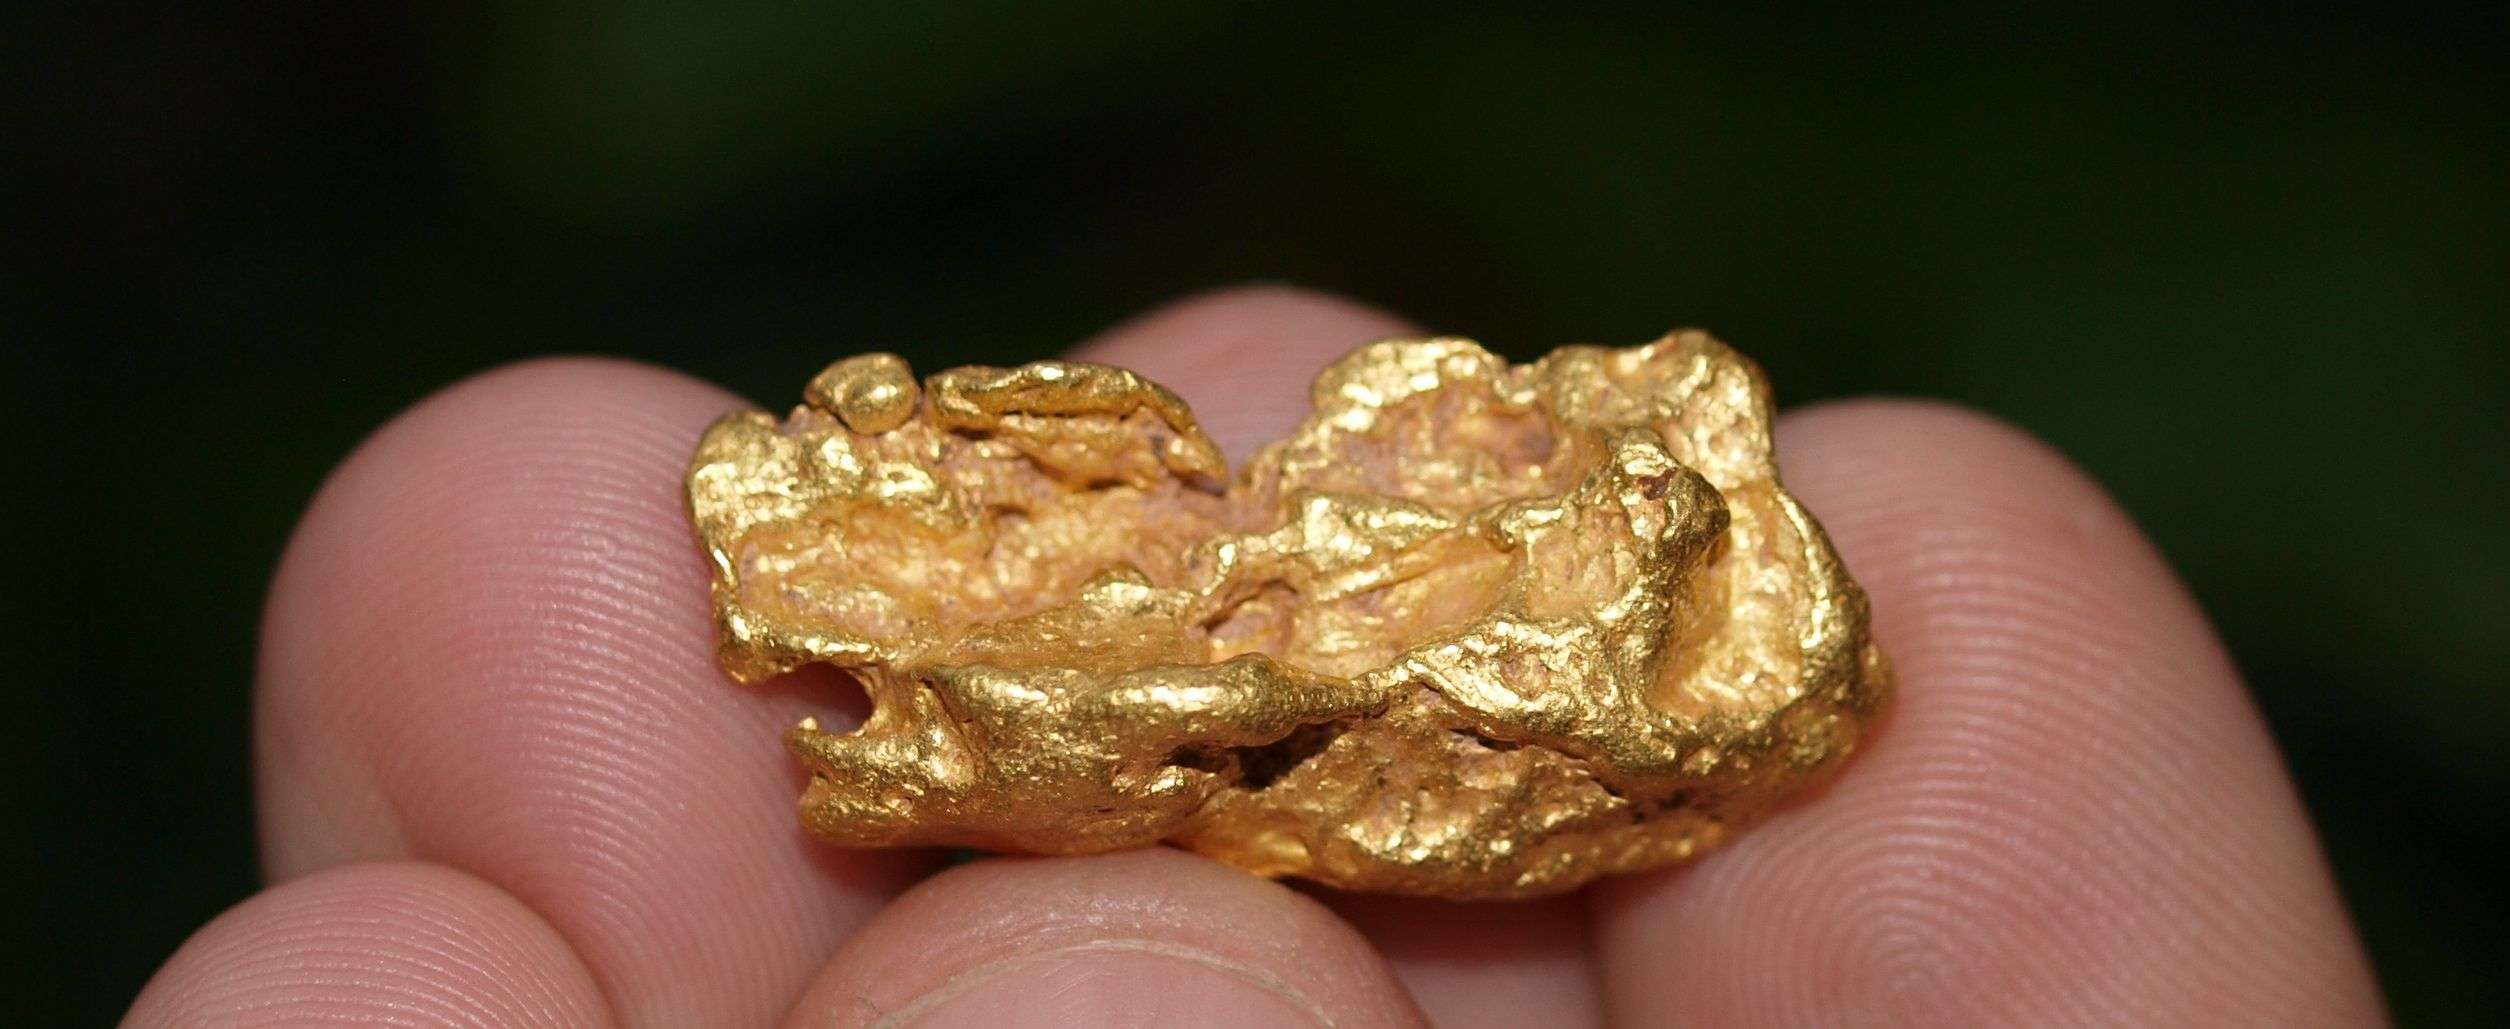 How to Find Gold Nuggets